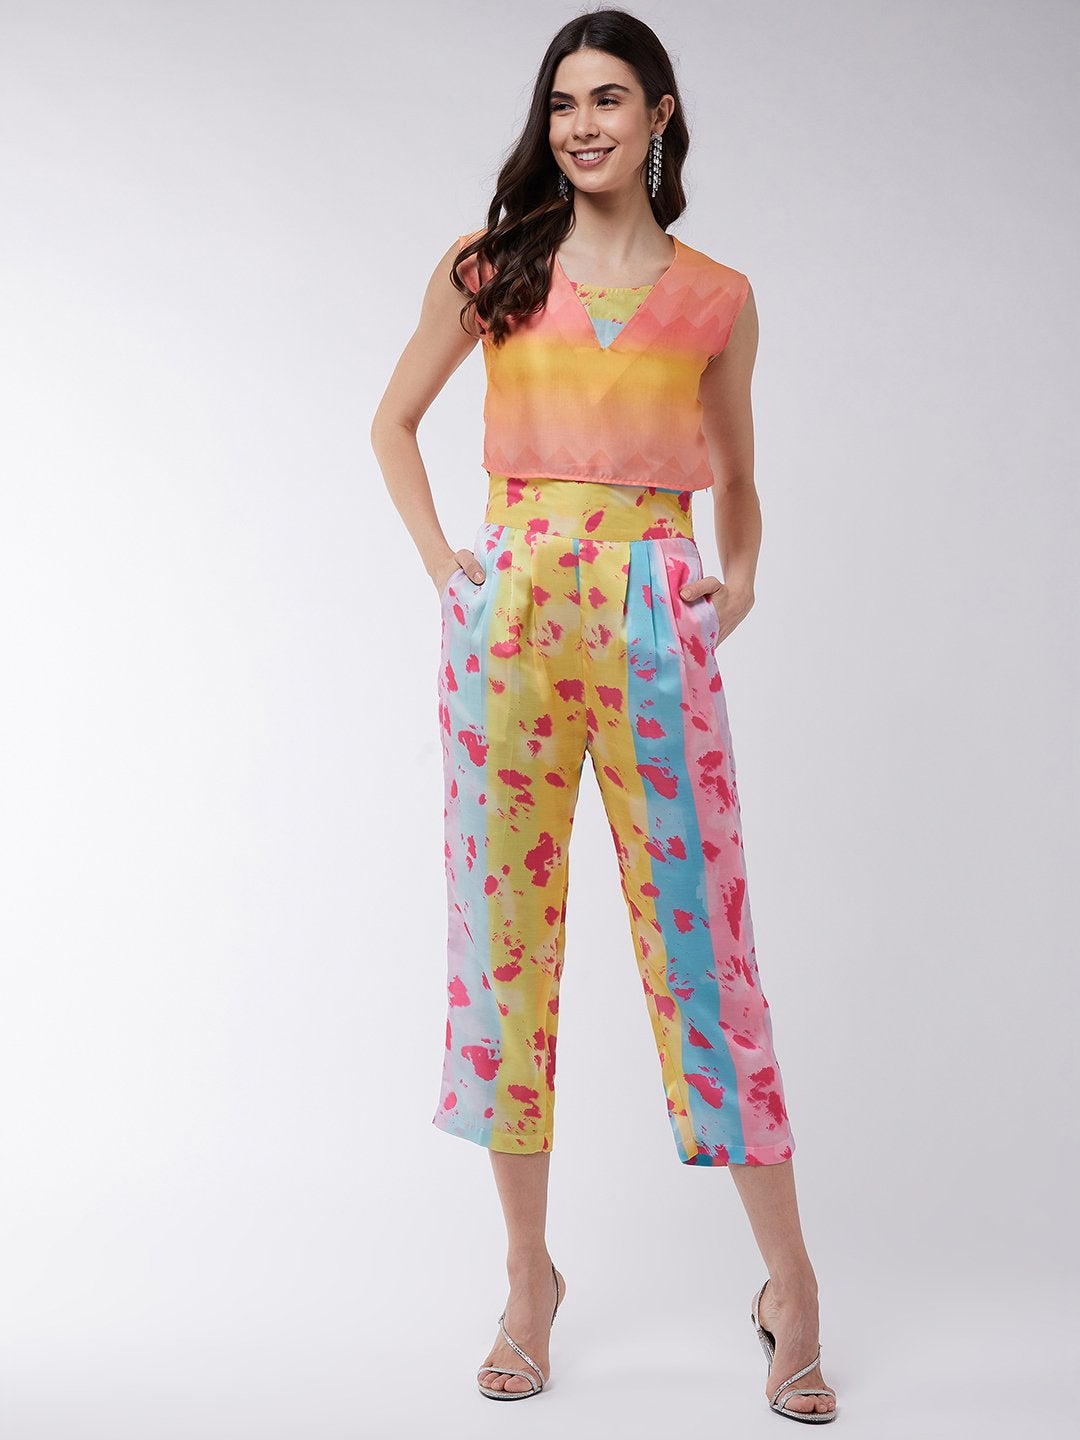 Women's Candy Inspired Digital Printed Crop Top With High Waist Pleated Pants - Pannkh